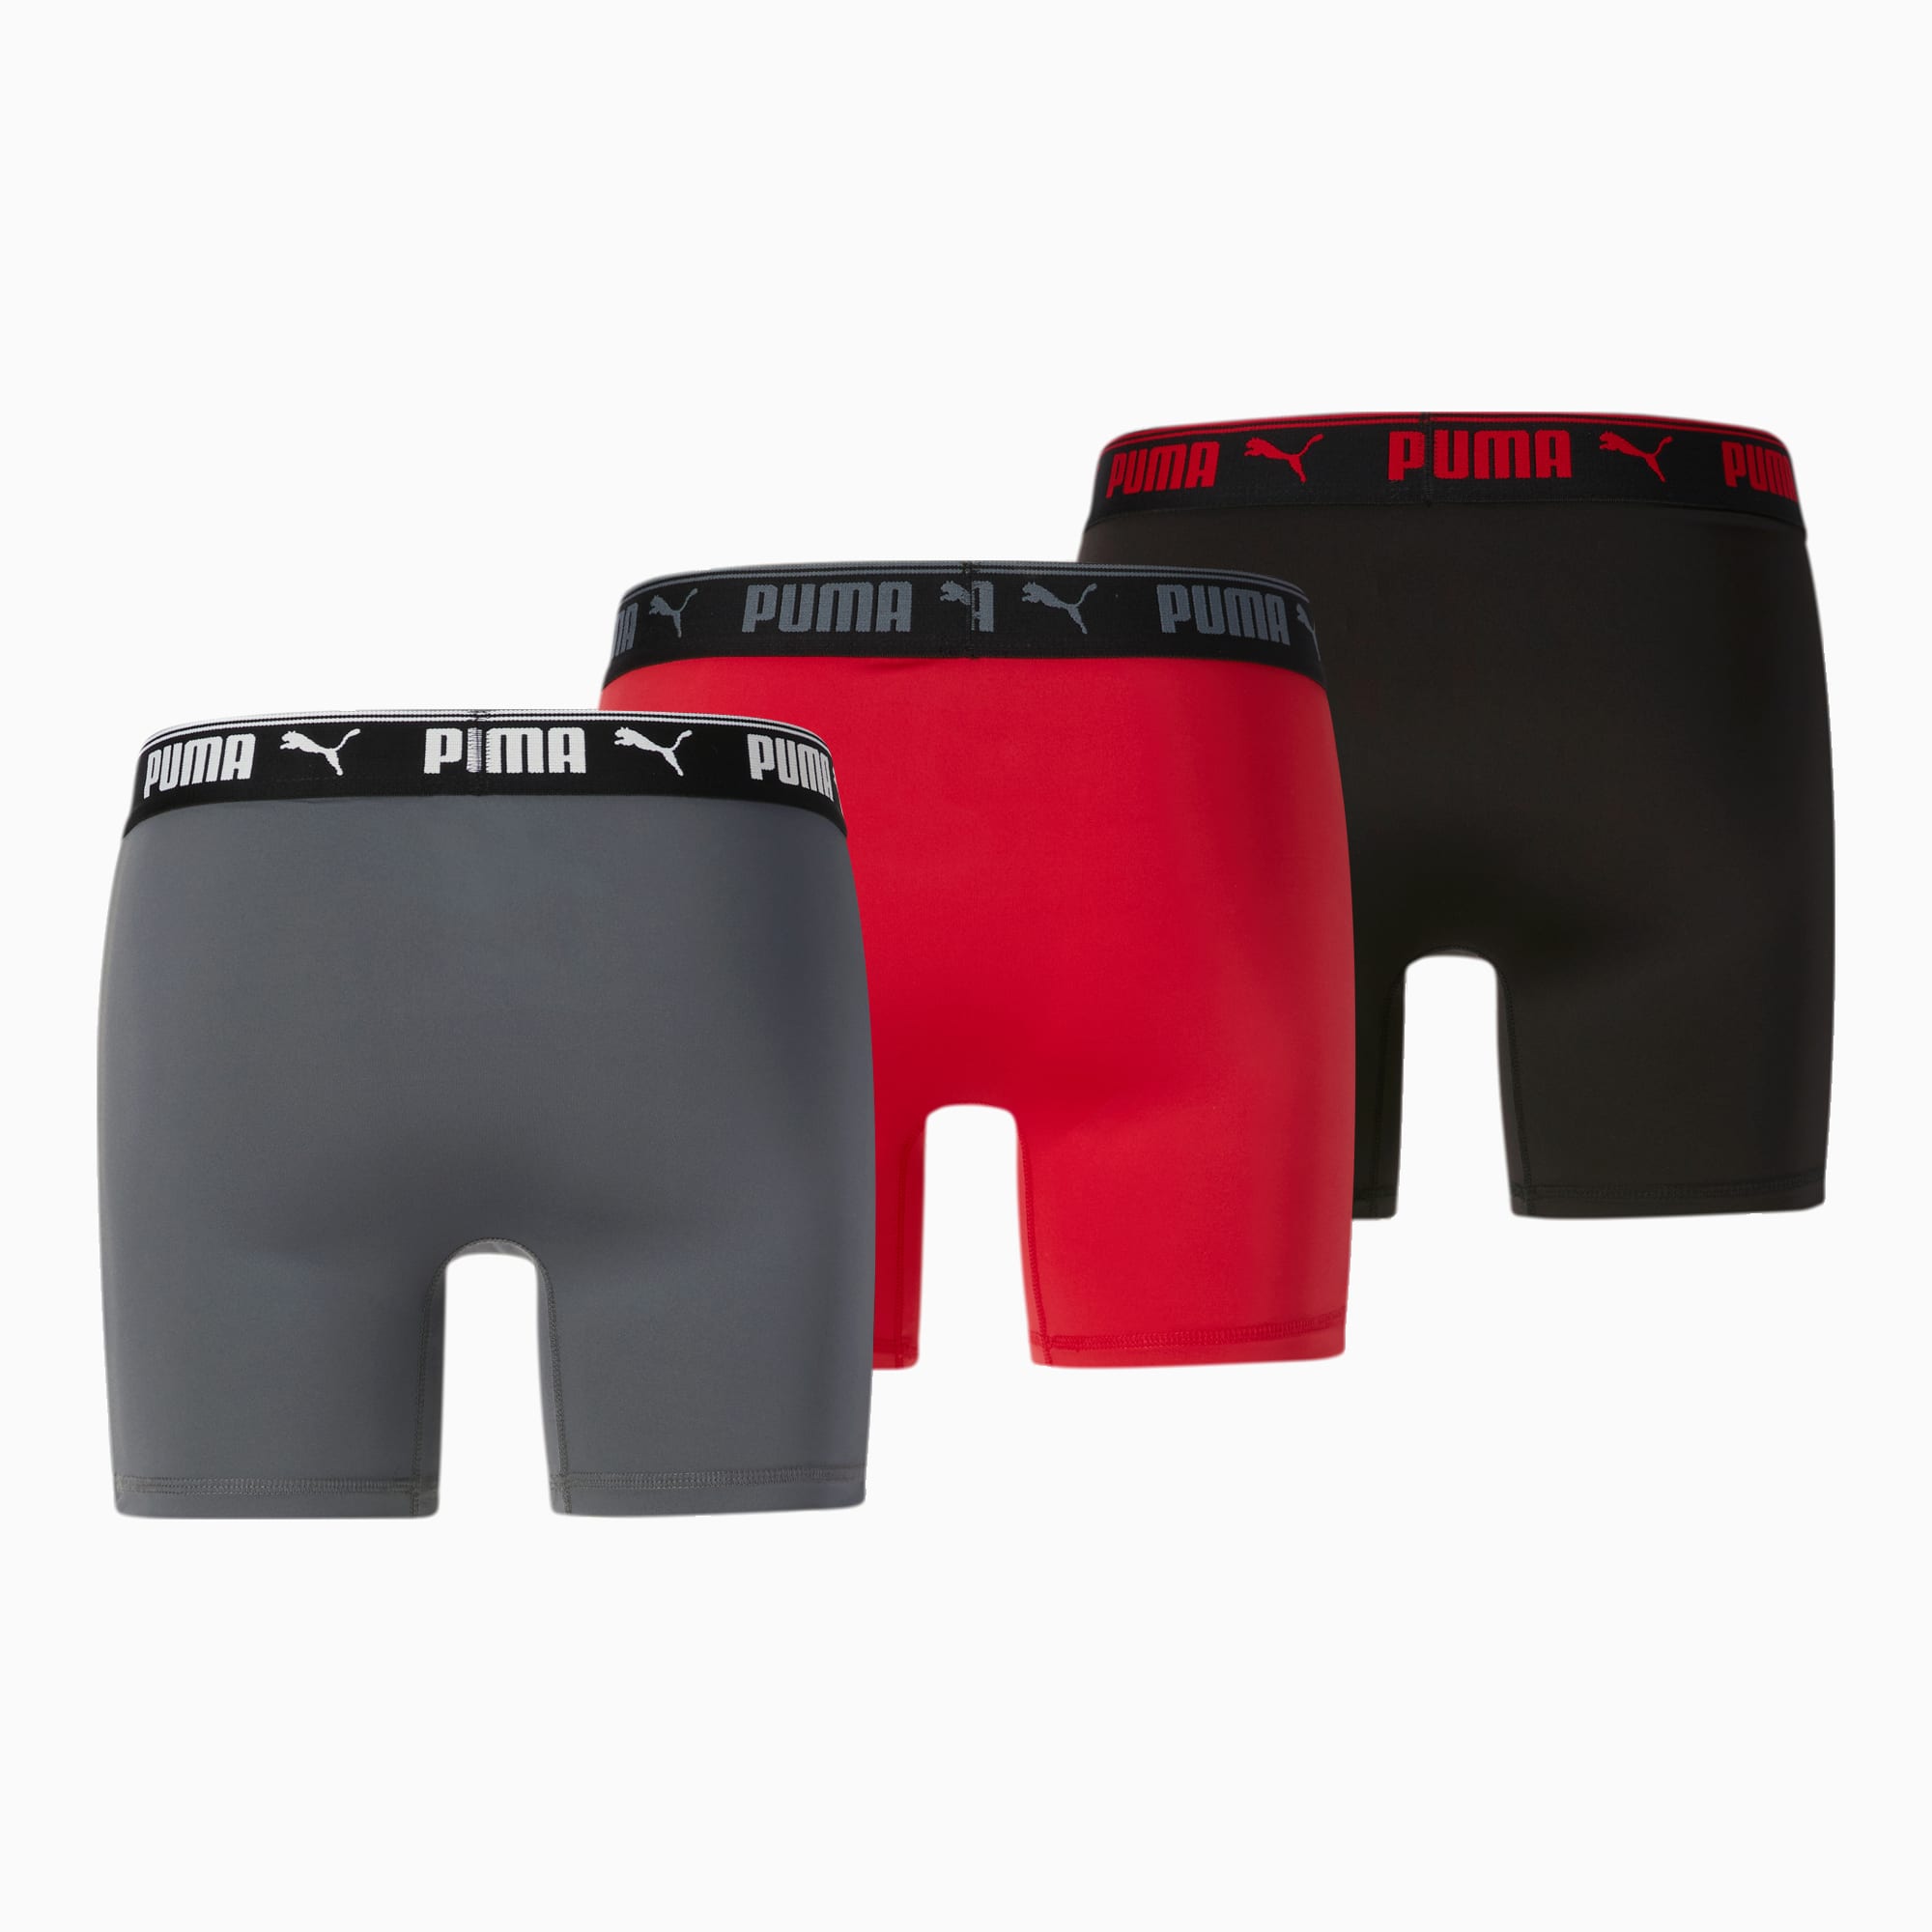 Men's Organic Cotton Boxers Triple Pack in Black/charcoal/grey